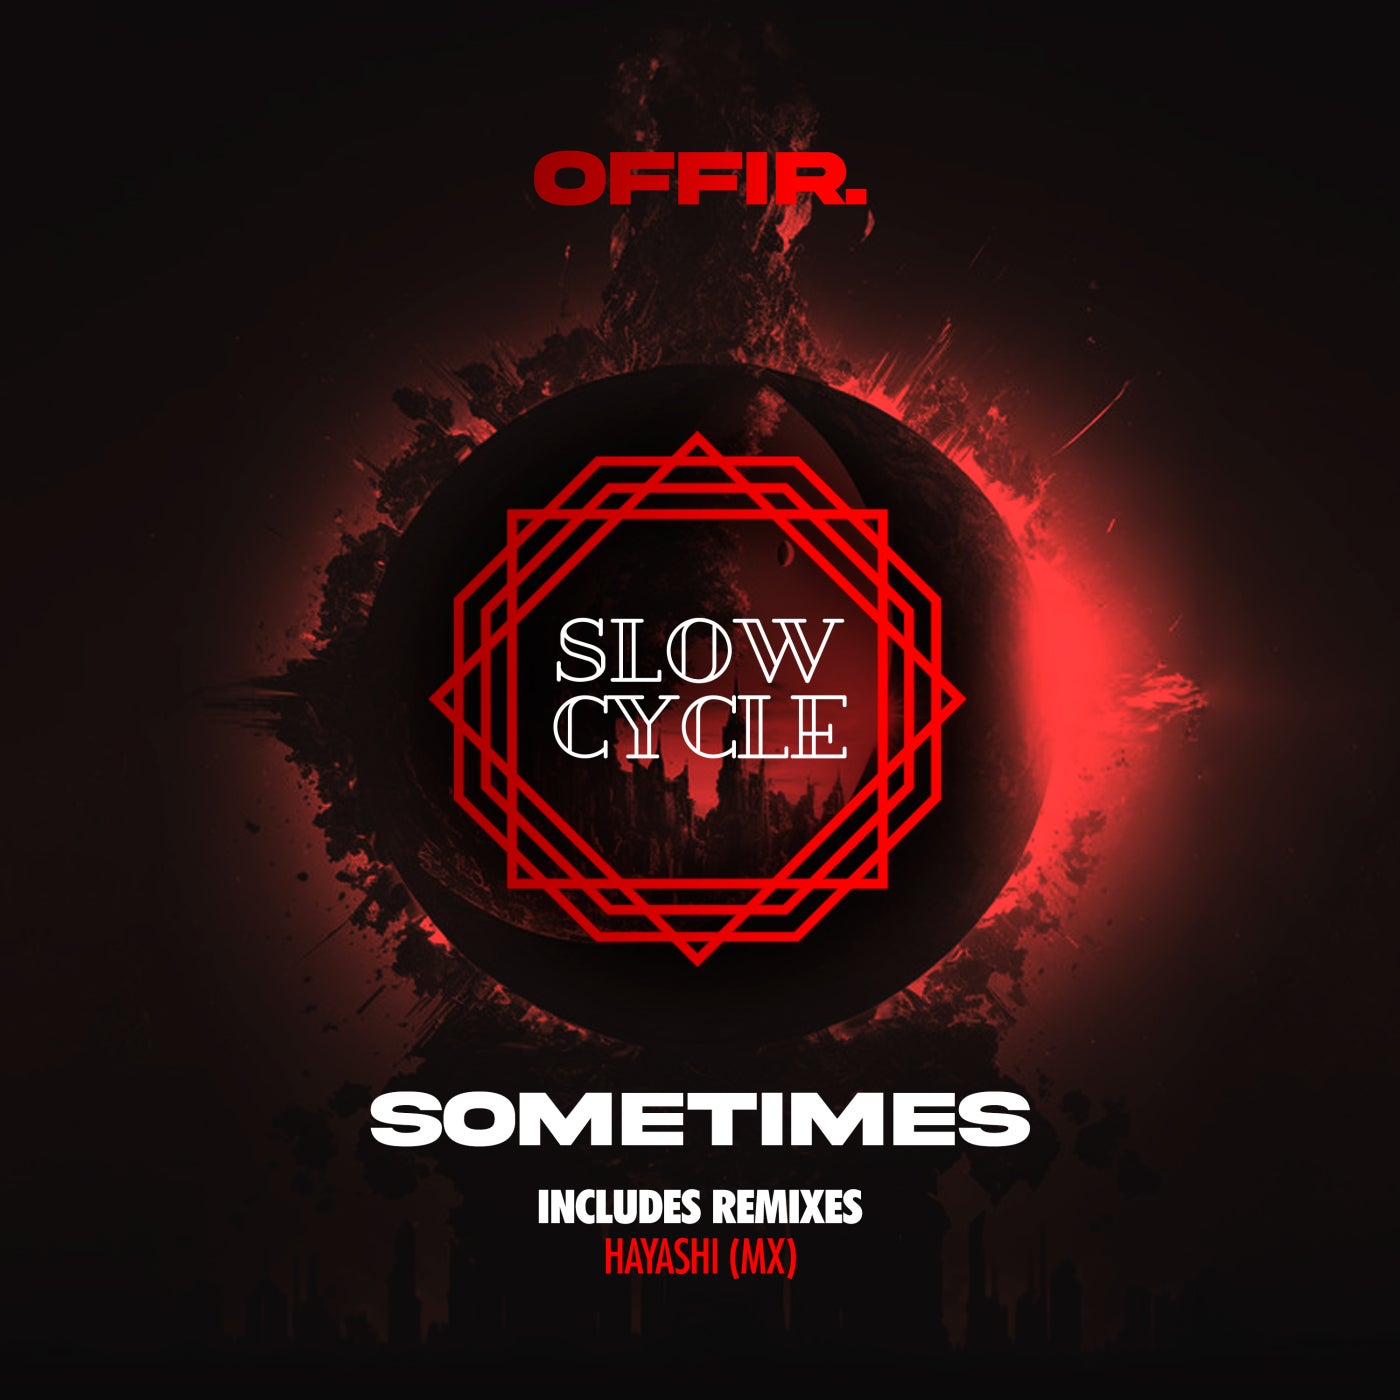 Offir. - Sometimes [Slow Cycle Records]